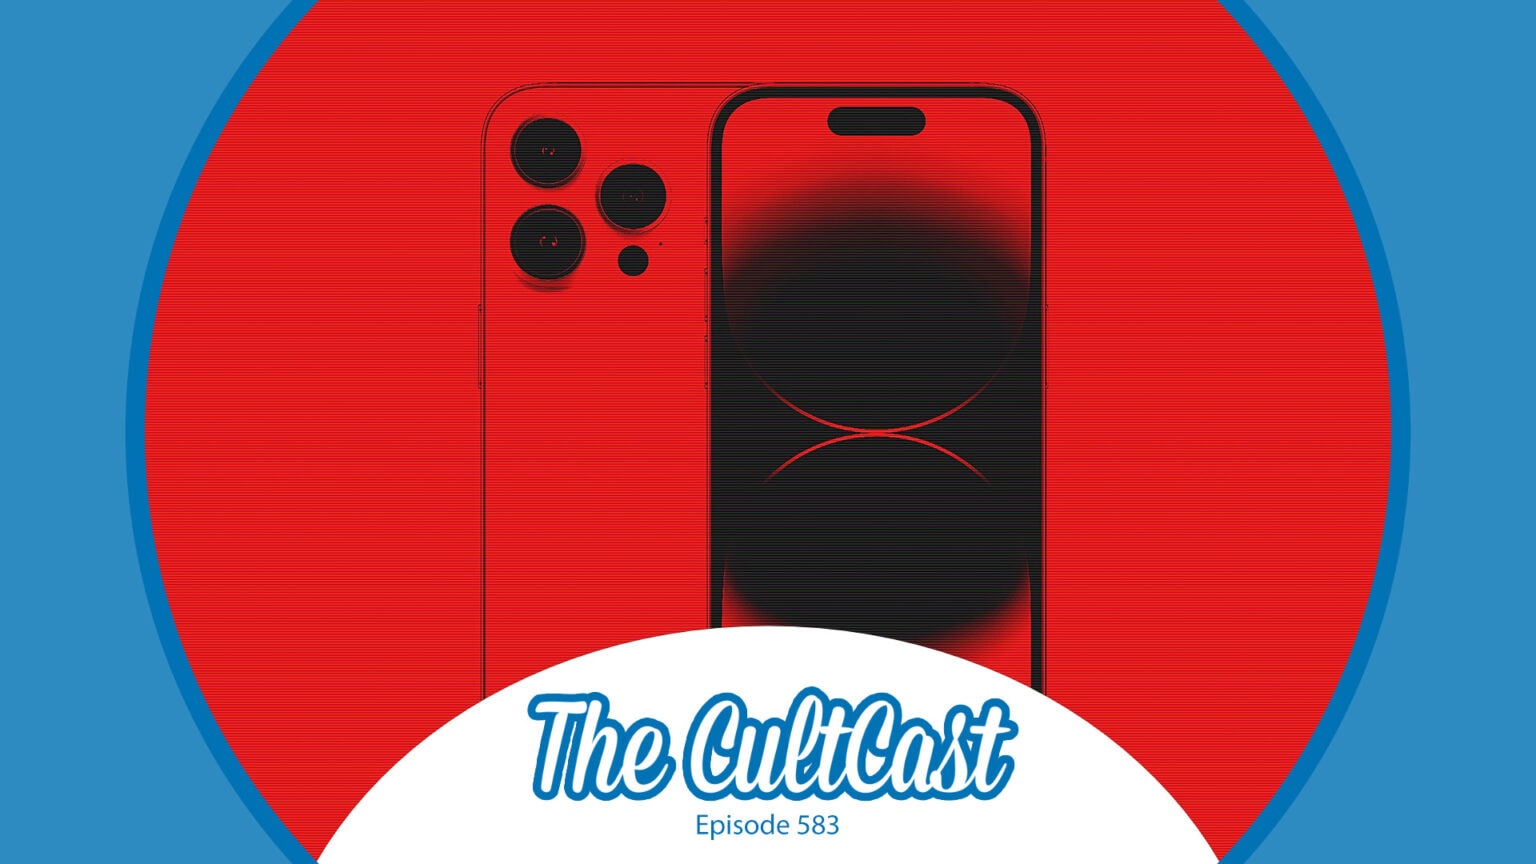 The CultCast Apple podcast logo with an iPhone Pro and an angry red background.